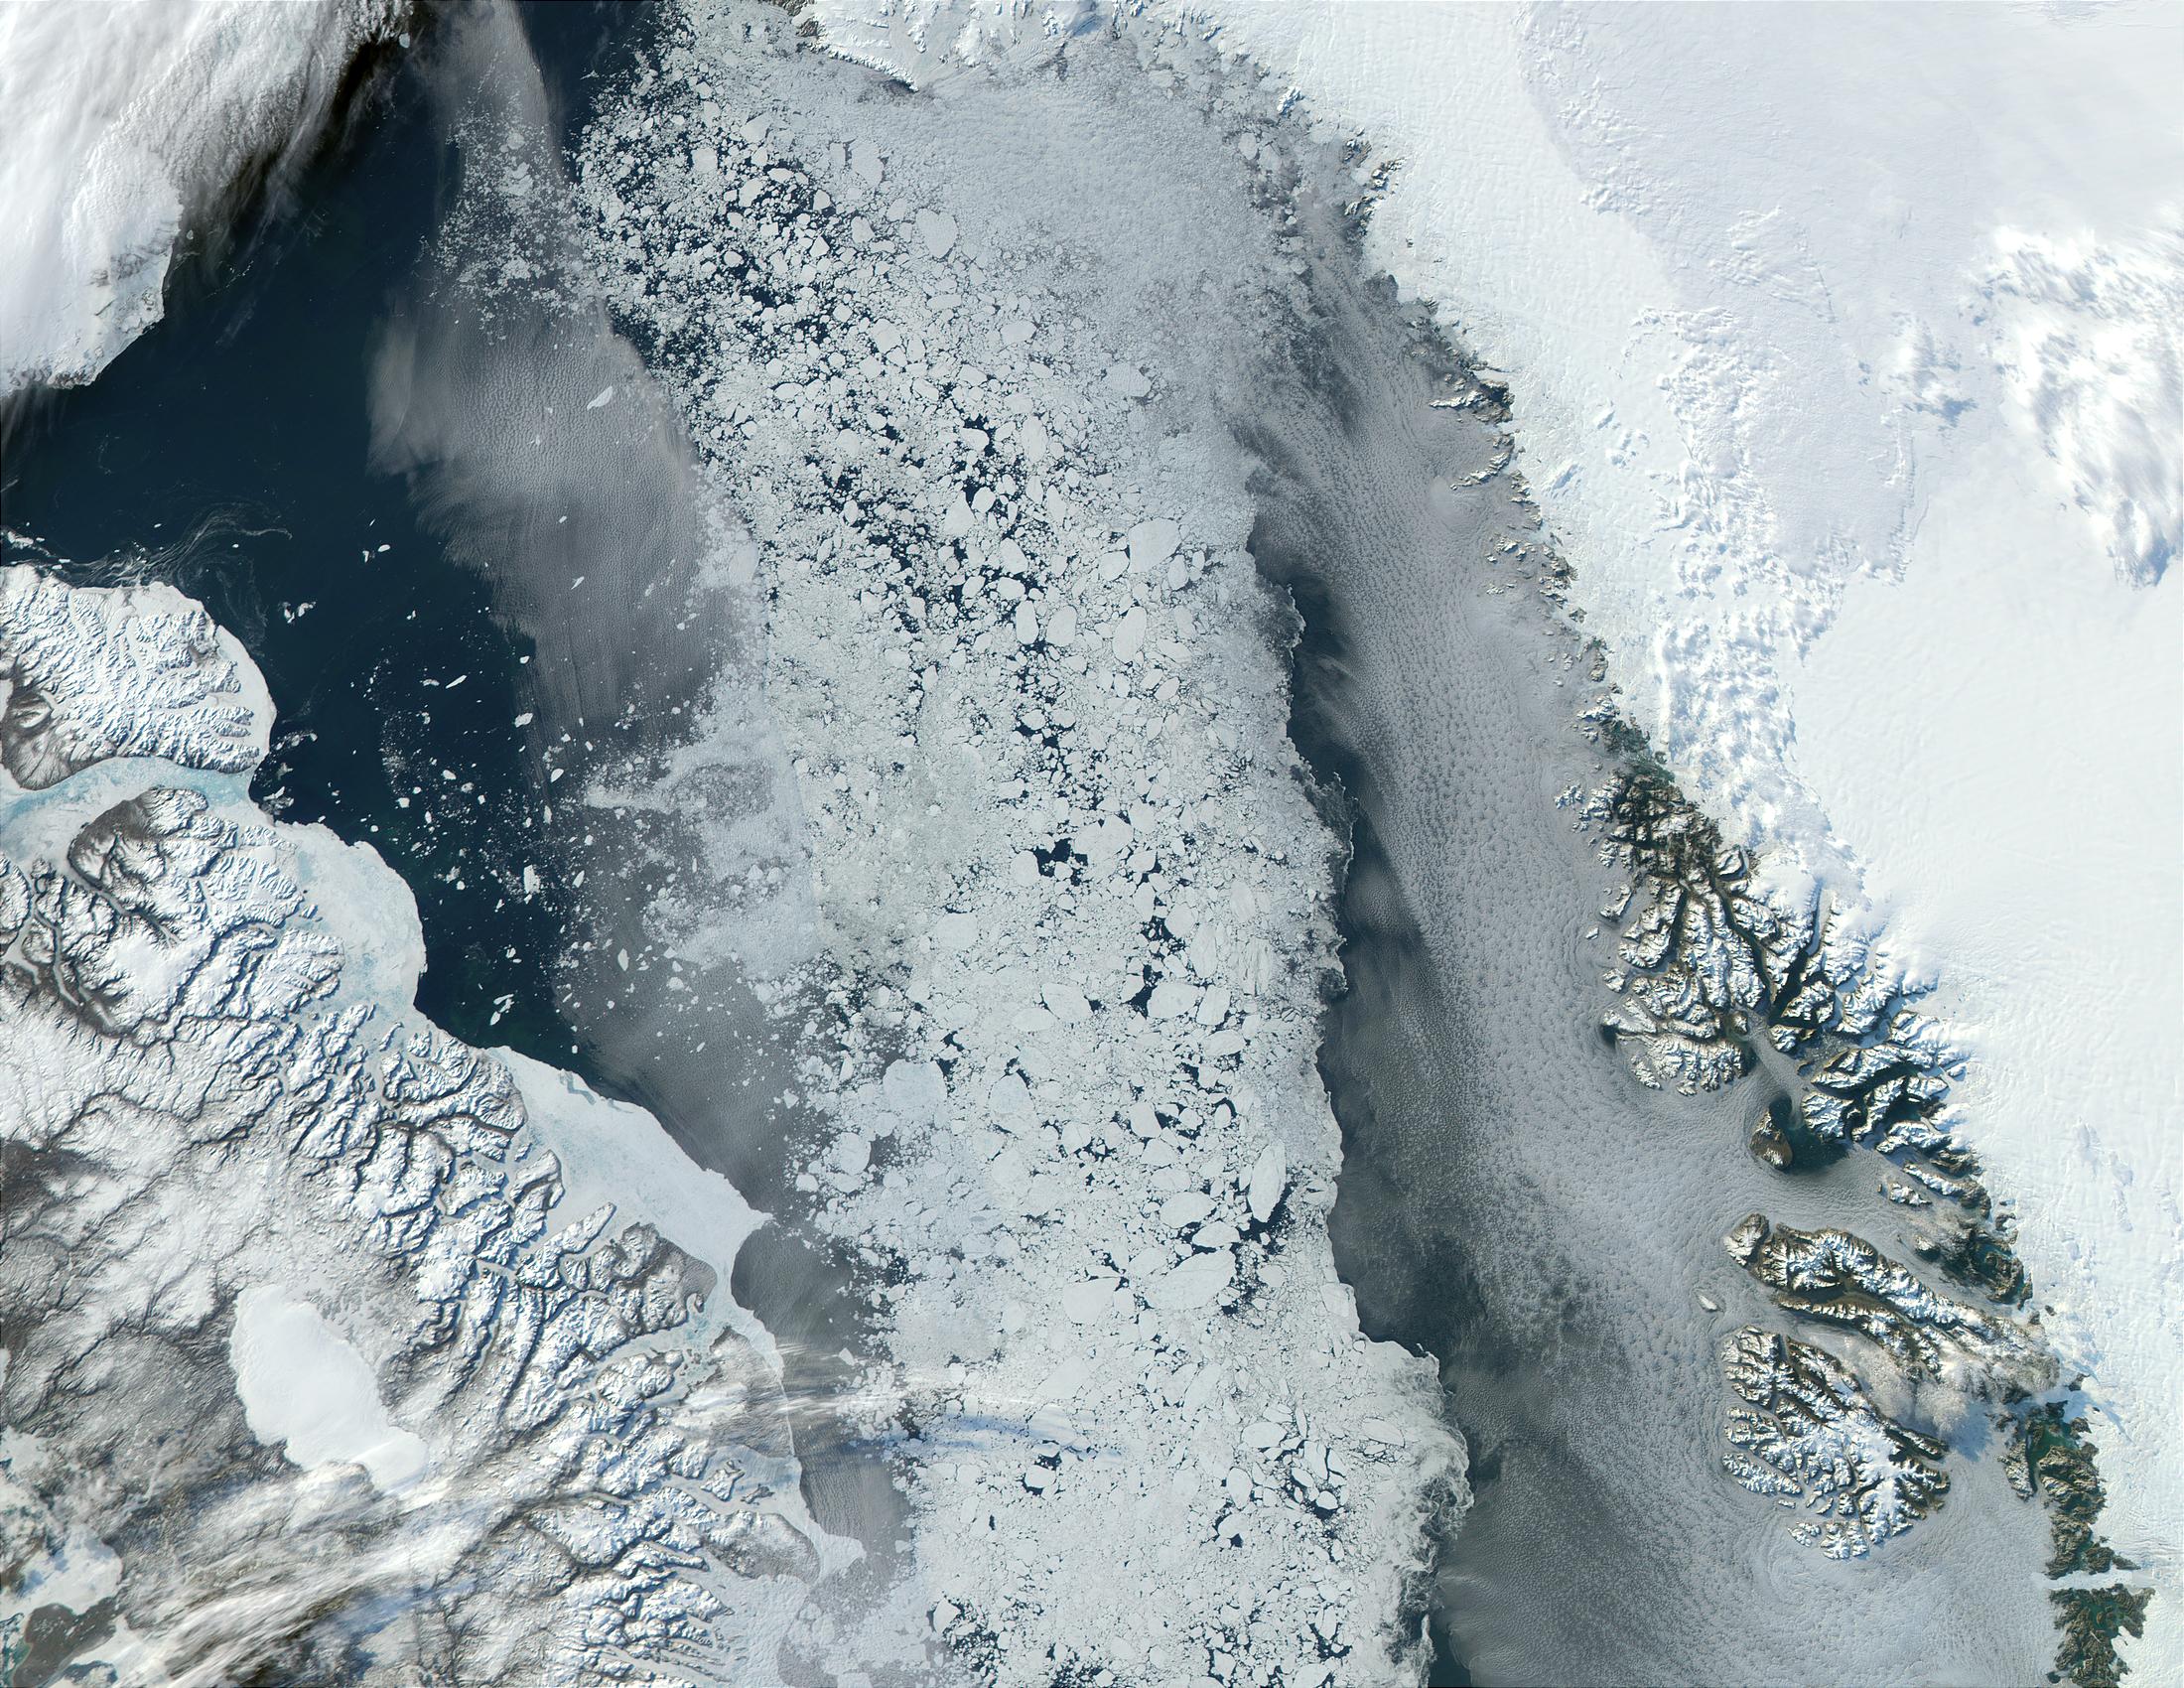 Baffin Bay, North Canada - related image preview